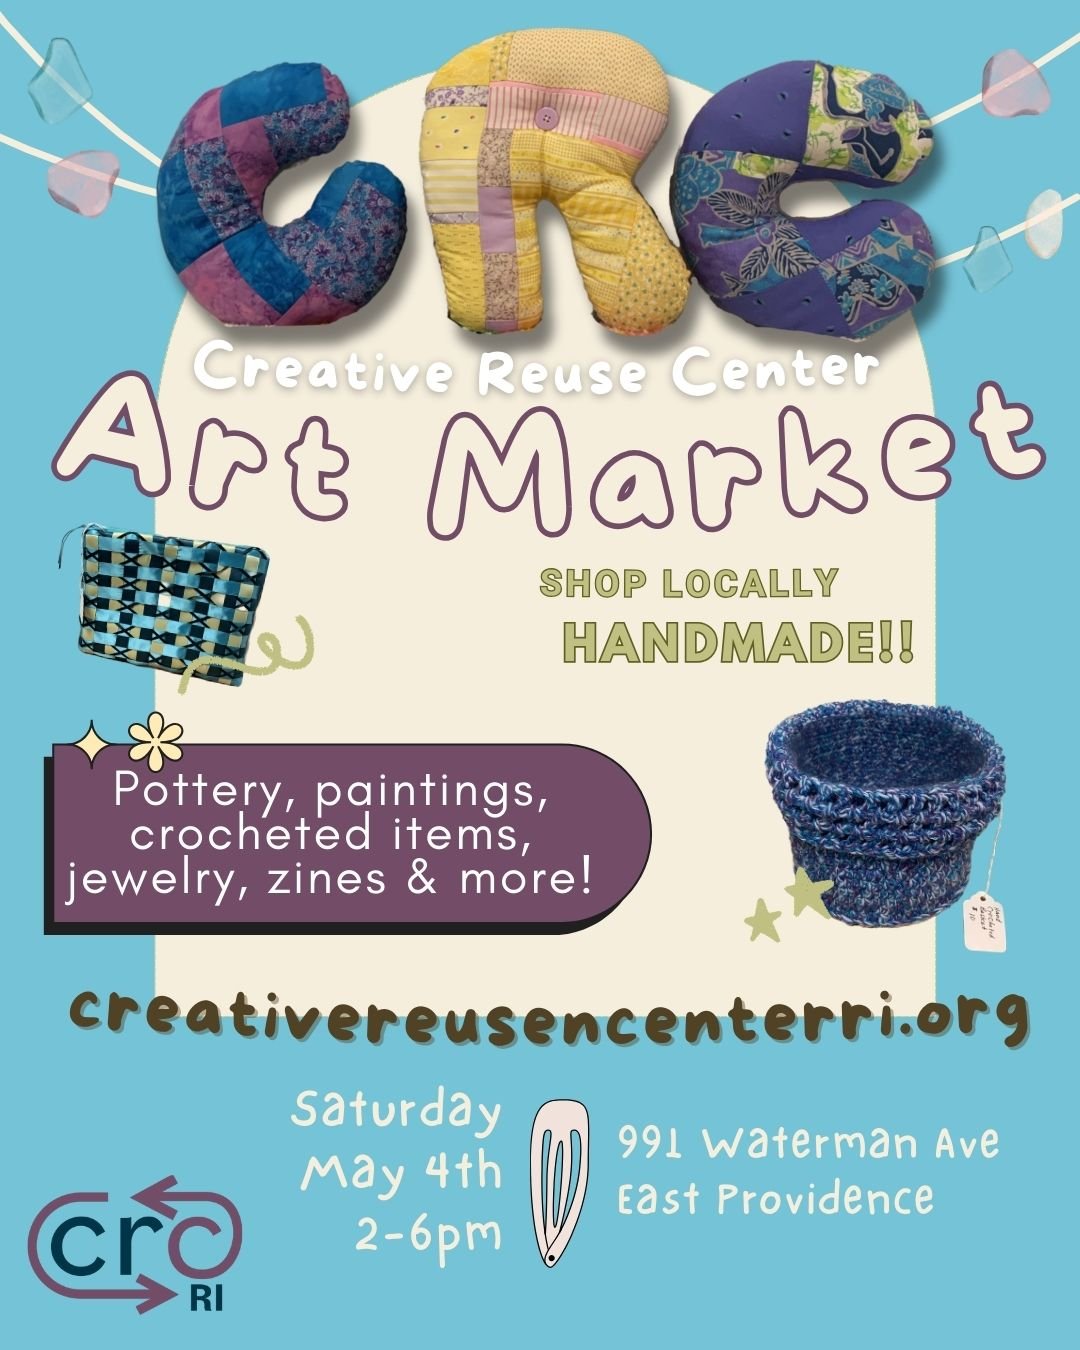 Mark Your Calendars! The CRC Art Market is coming up soon! 

May 4th from 2-6pm.

Come out and support members of the CRC Community and purchase handmade items.

Perfect gifts for mother's day!

Some items include: Crocheted flower bouquets, prints, 